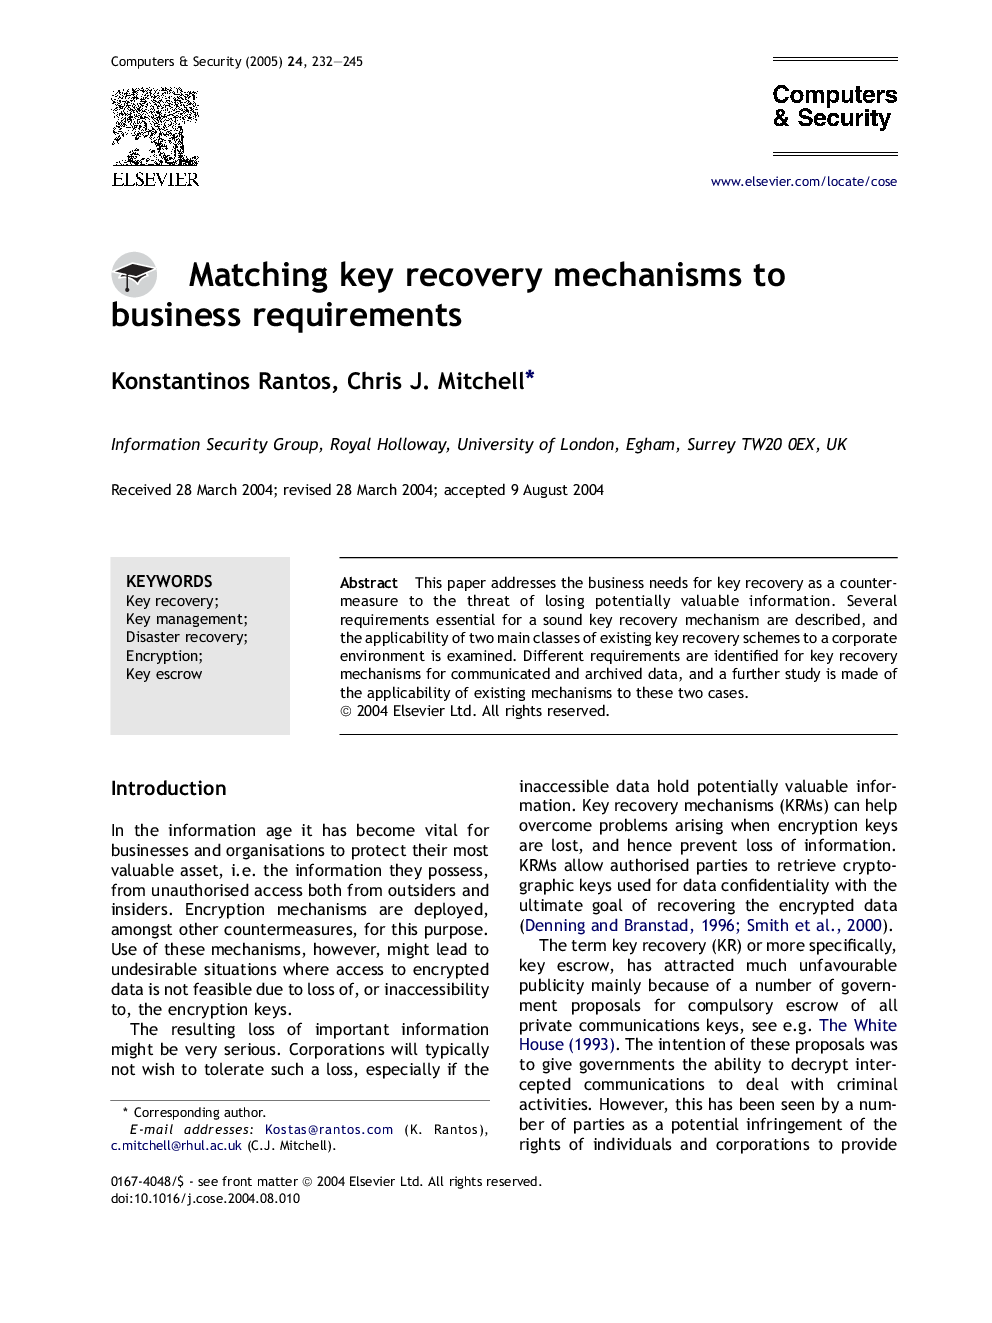 Matching key recovery mechanisms to business requirements